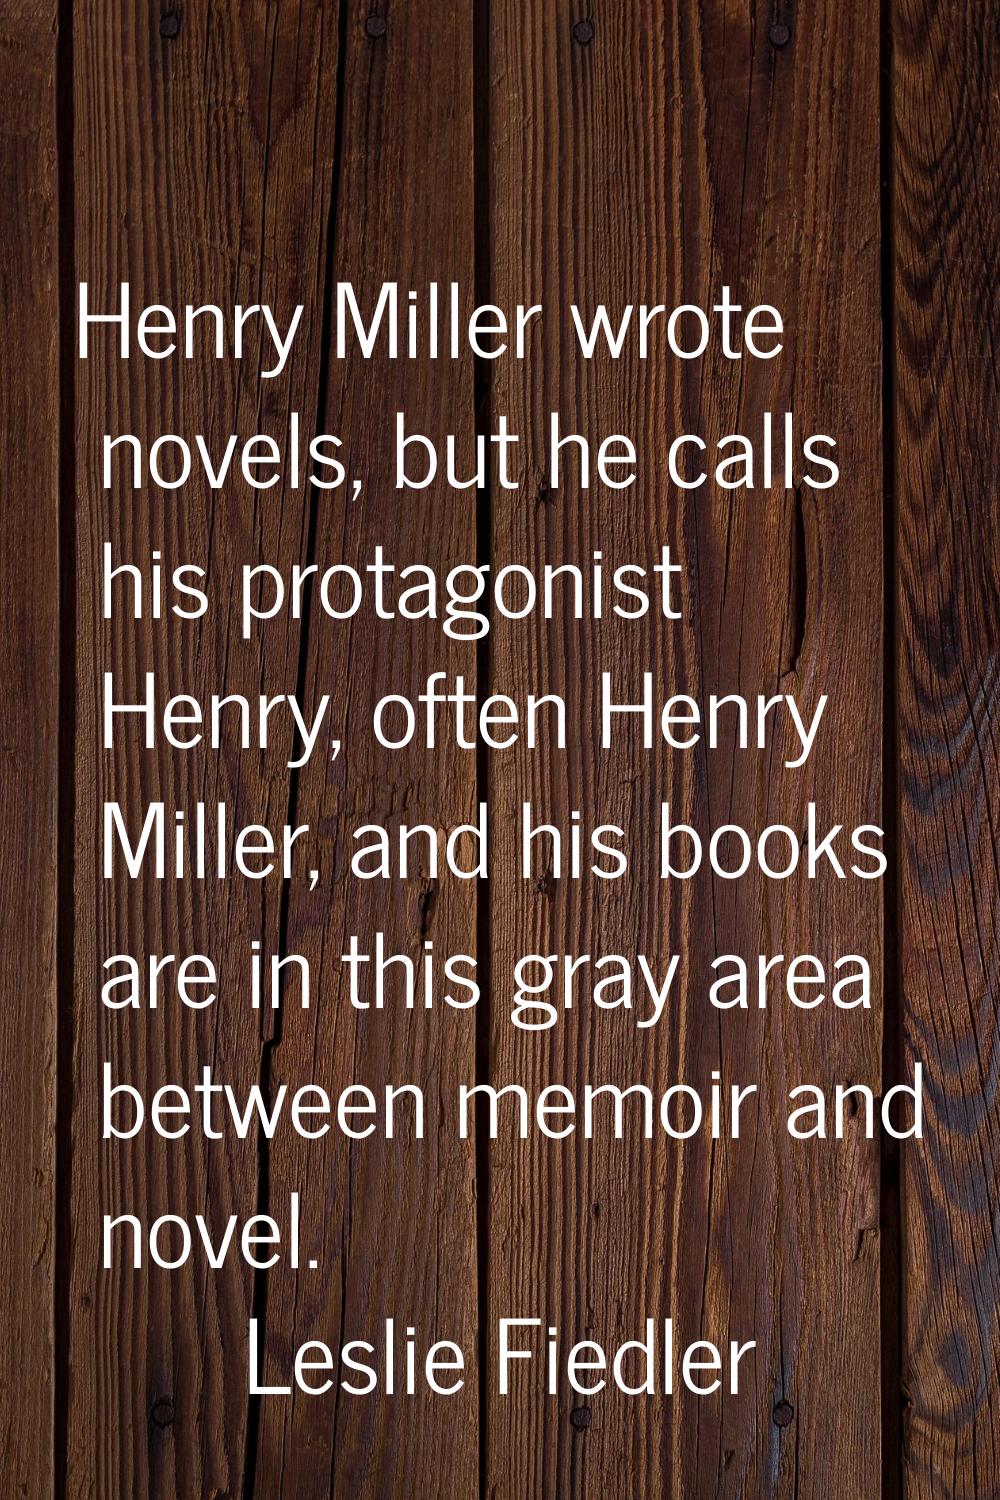 Henry Miller wrote novels, but he calls his protagonist Henry, often Henry Miller, and his books ar